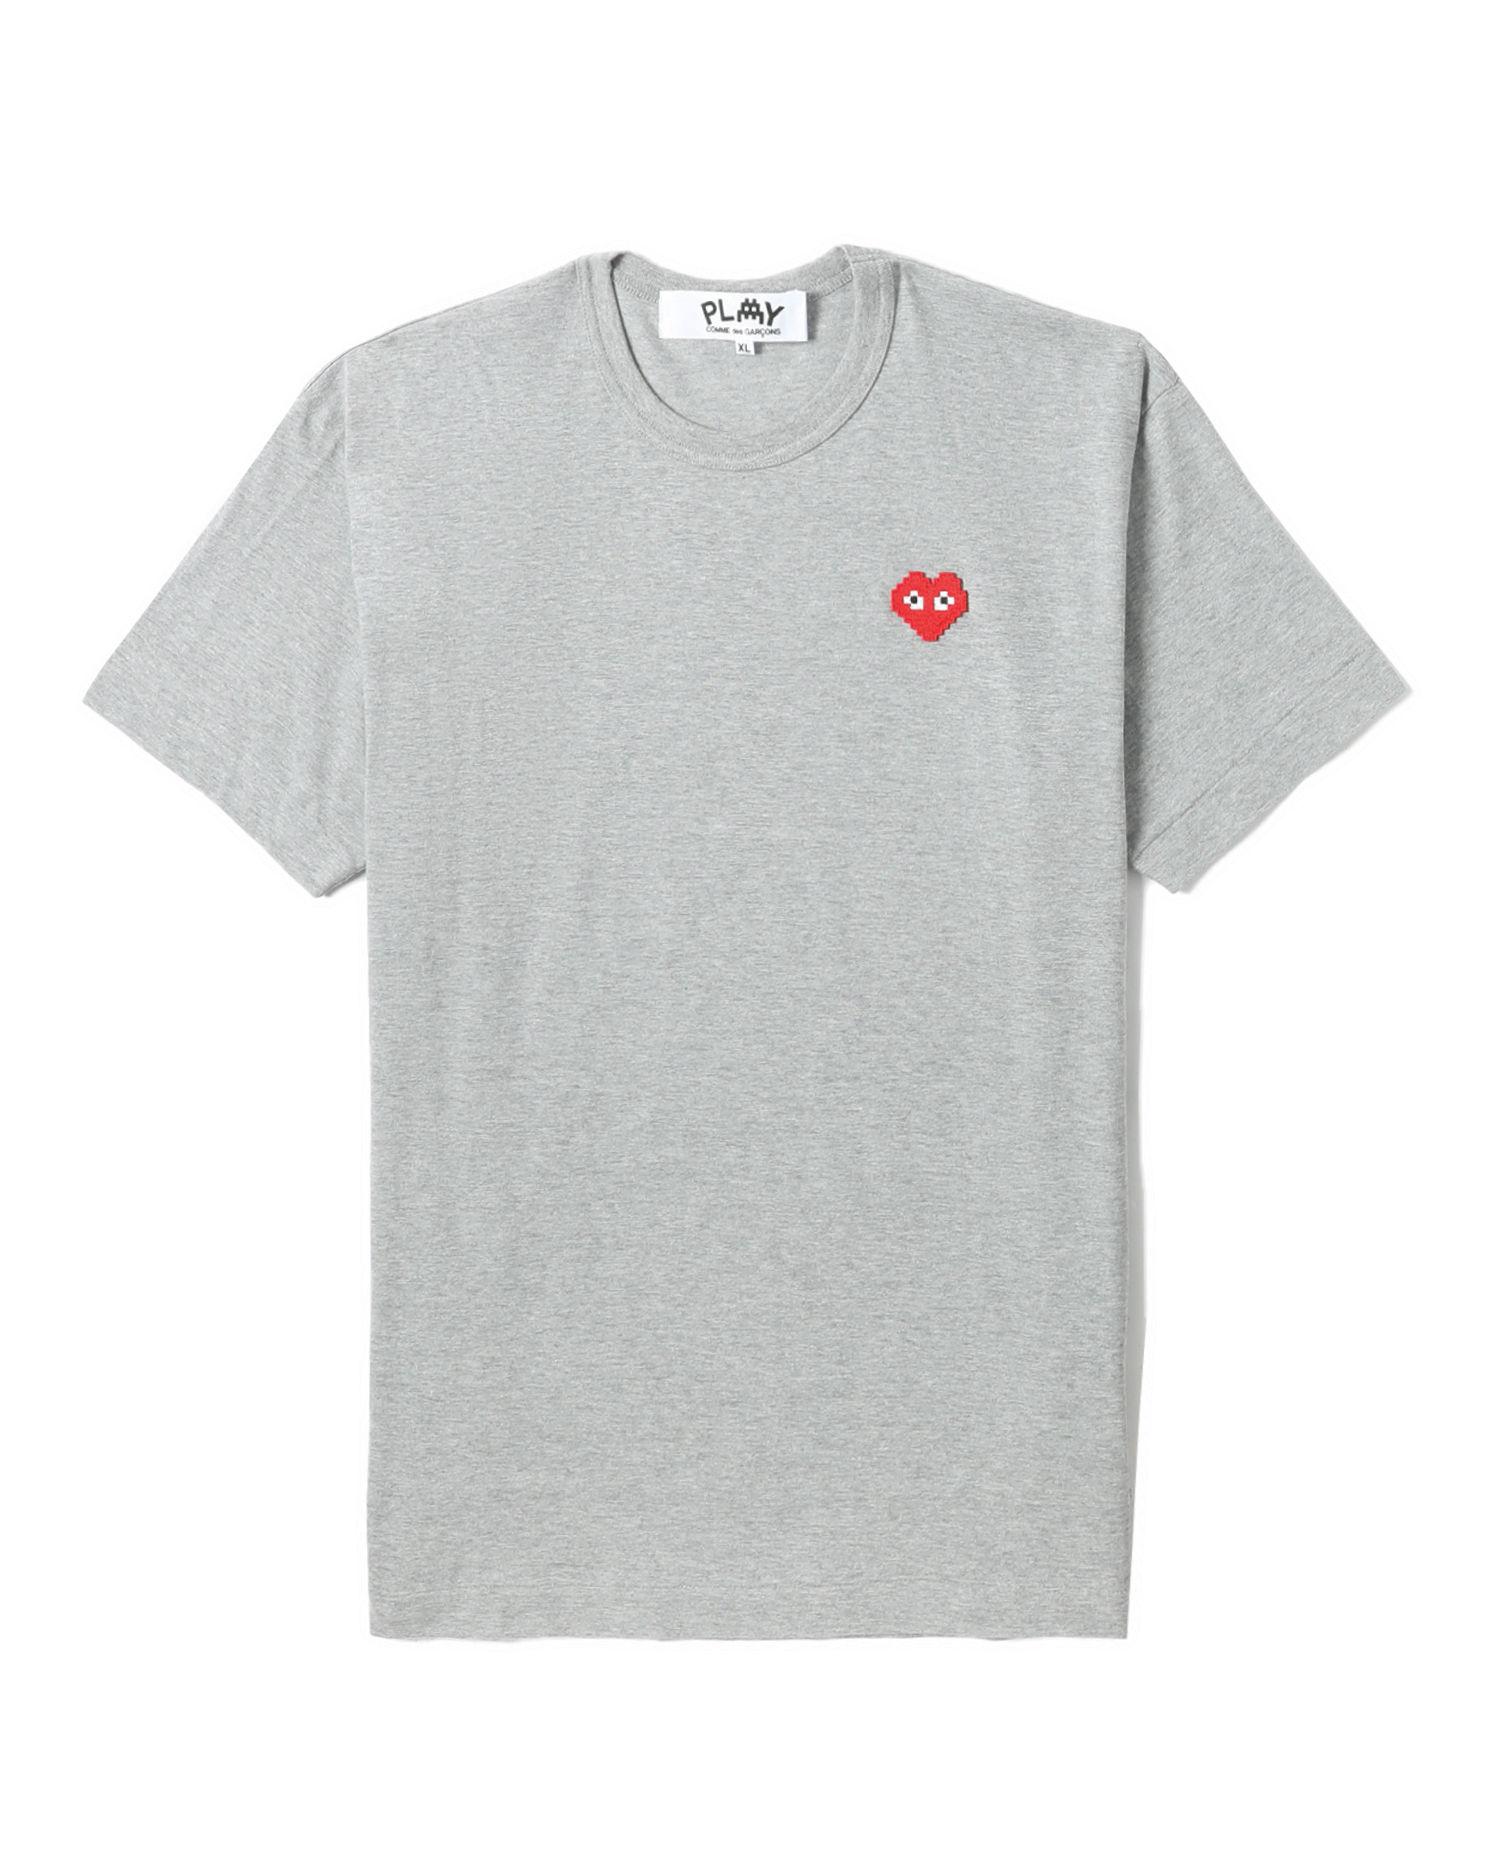 X INVADER logo tee by COMME DES GARCONS